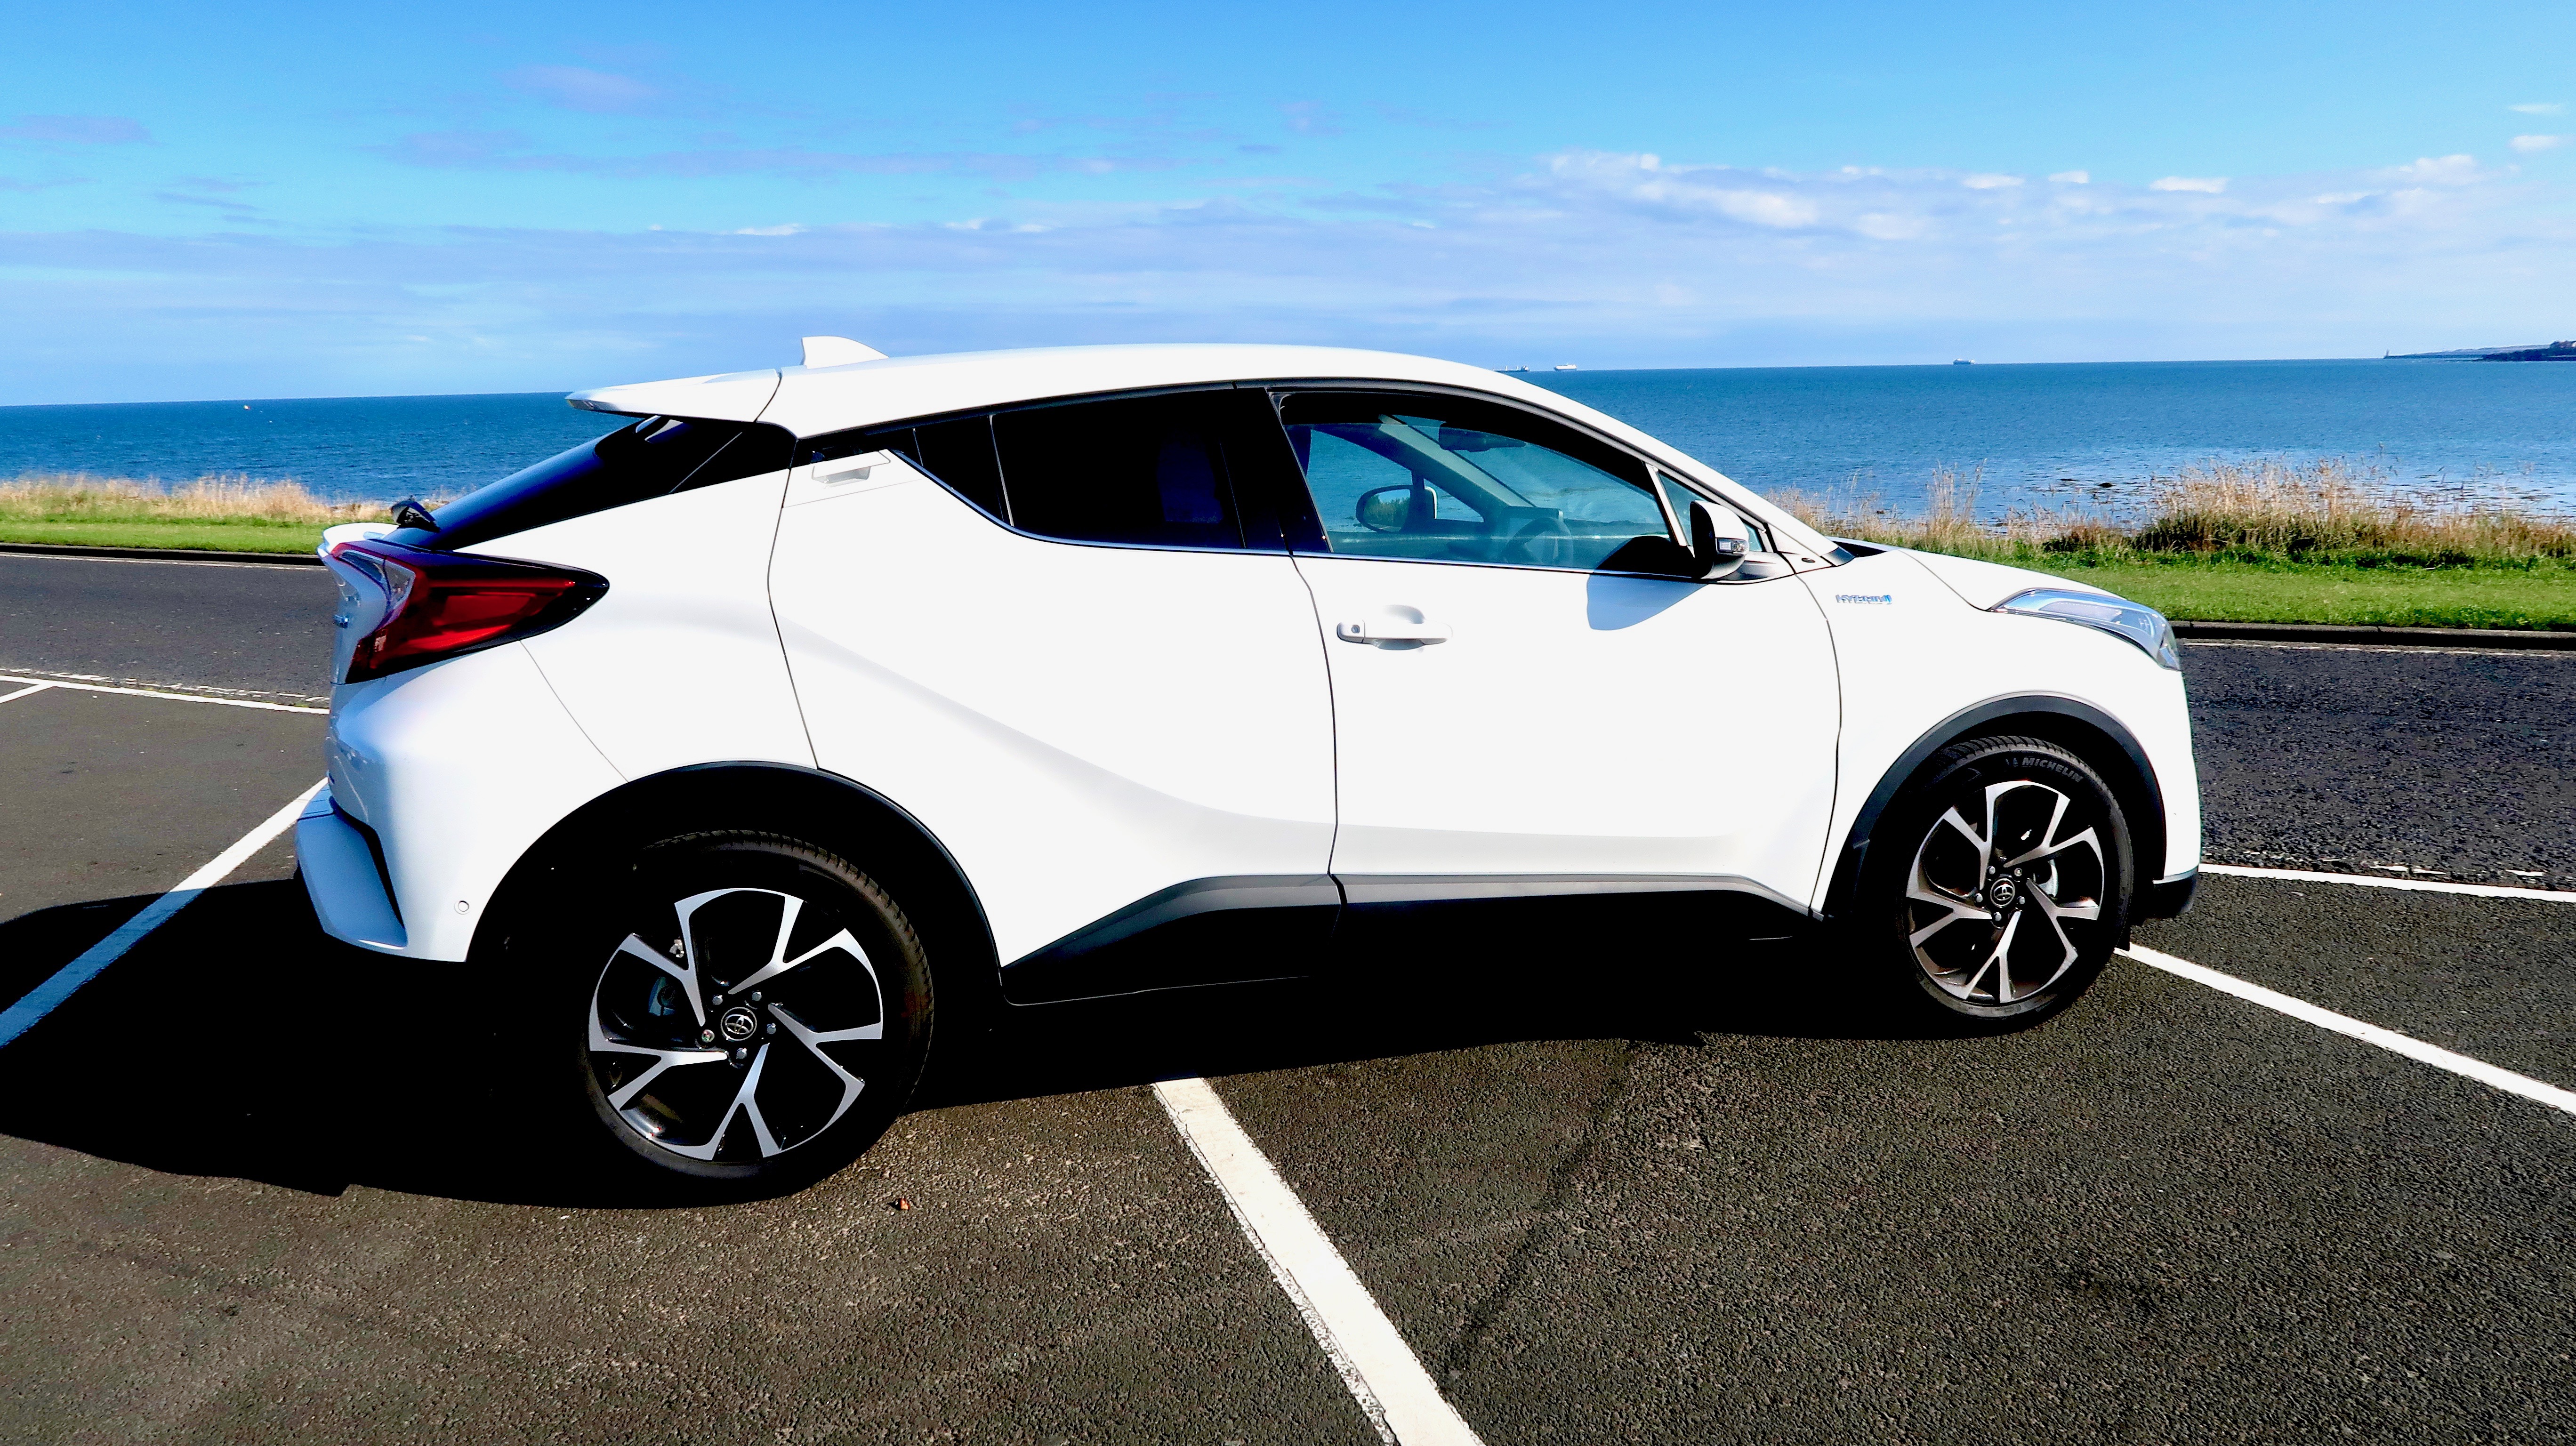 Review: The Toyota C-HR Hybrid is a mass-market vehicle with panache